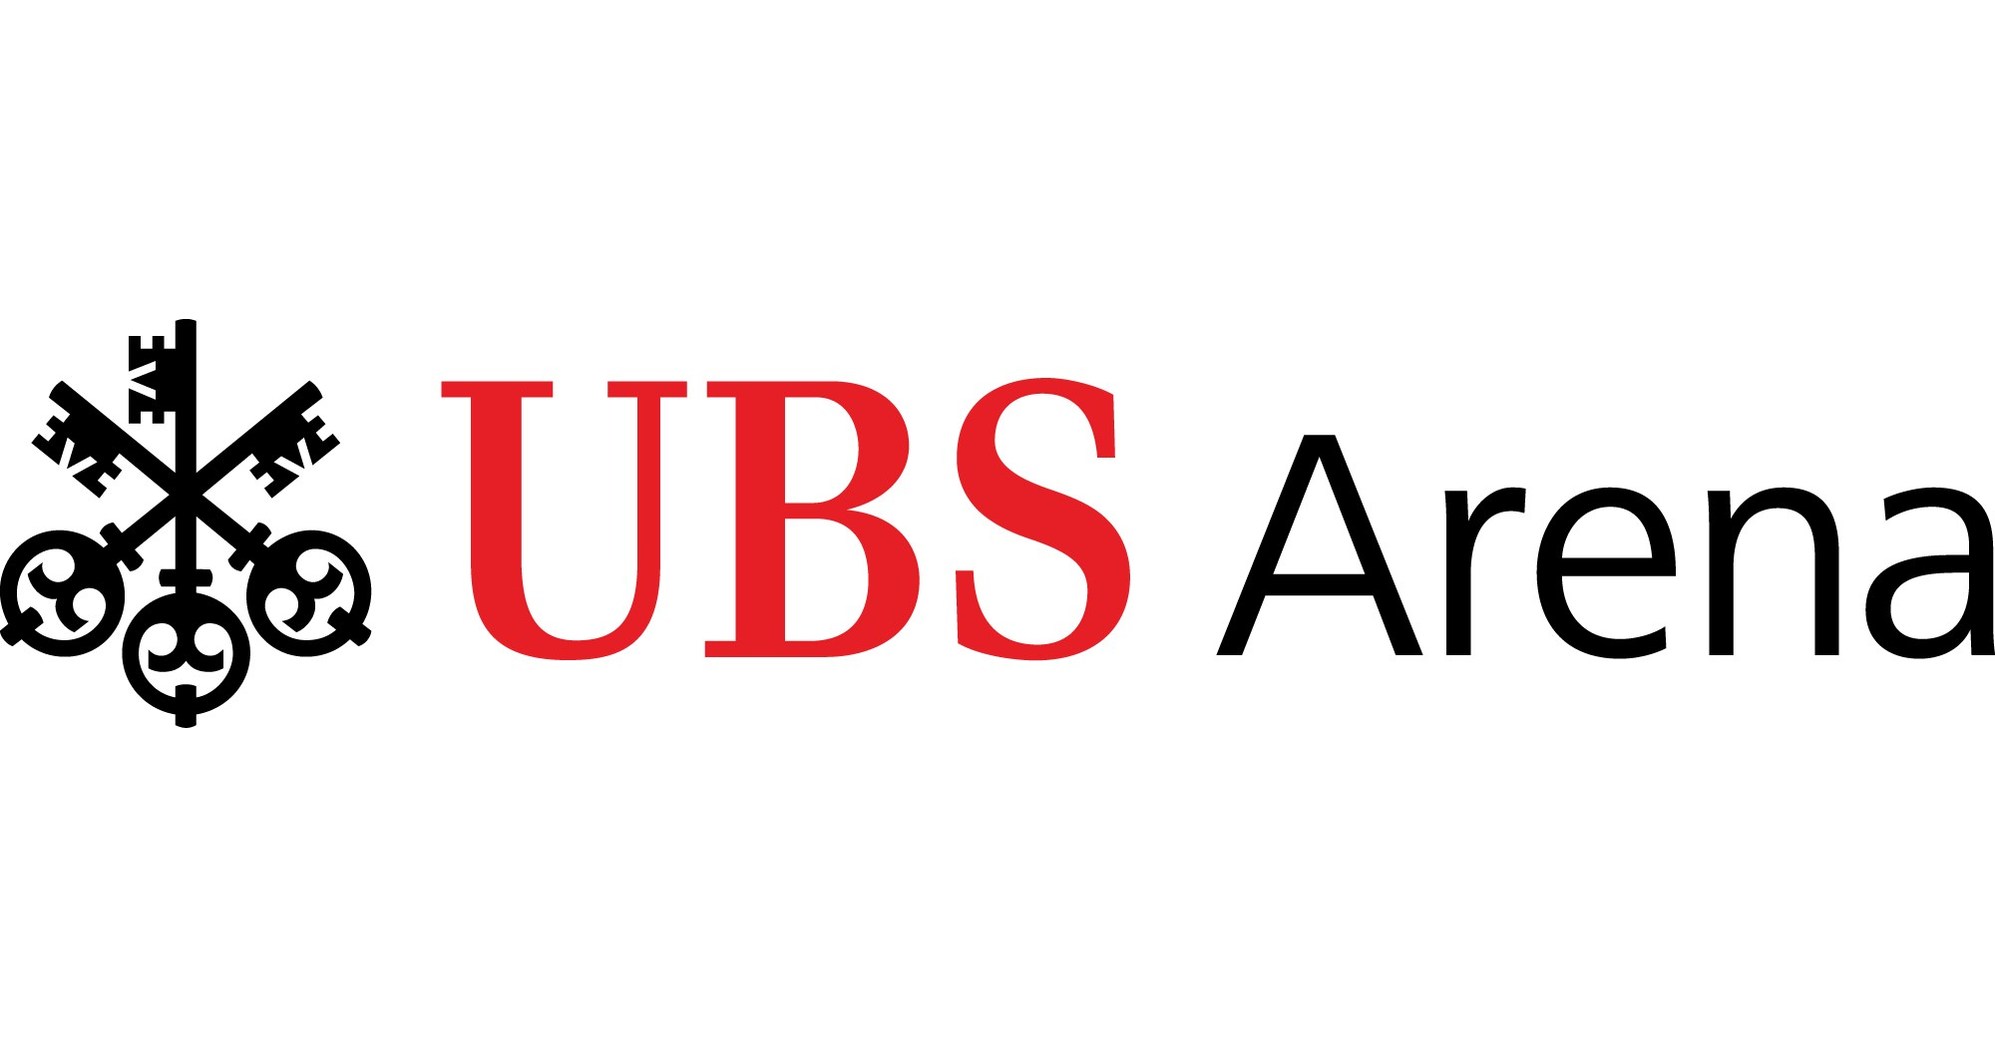 UBS Arena at Belmont Park Set to Open in New York [PHOTOS] – WWD